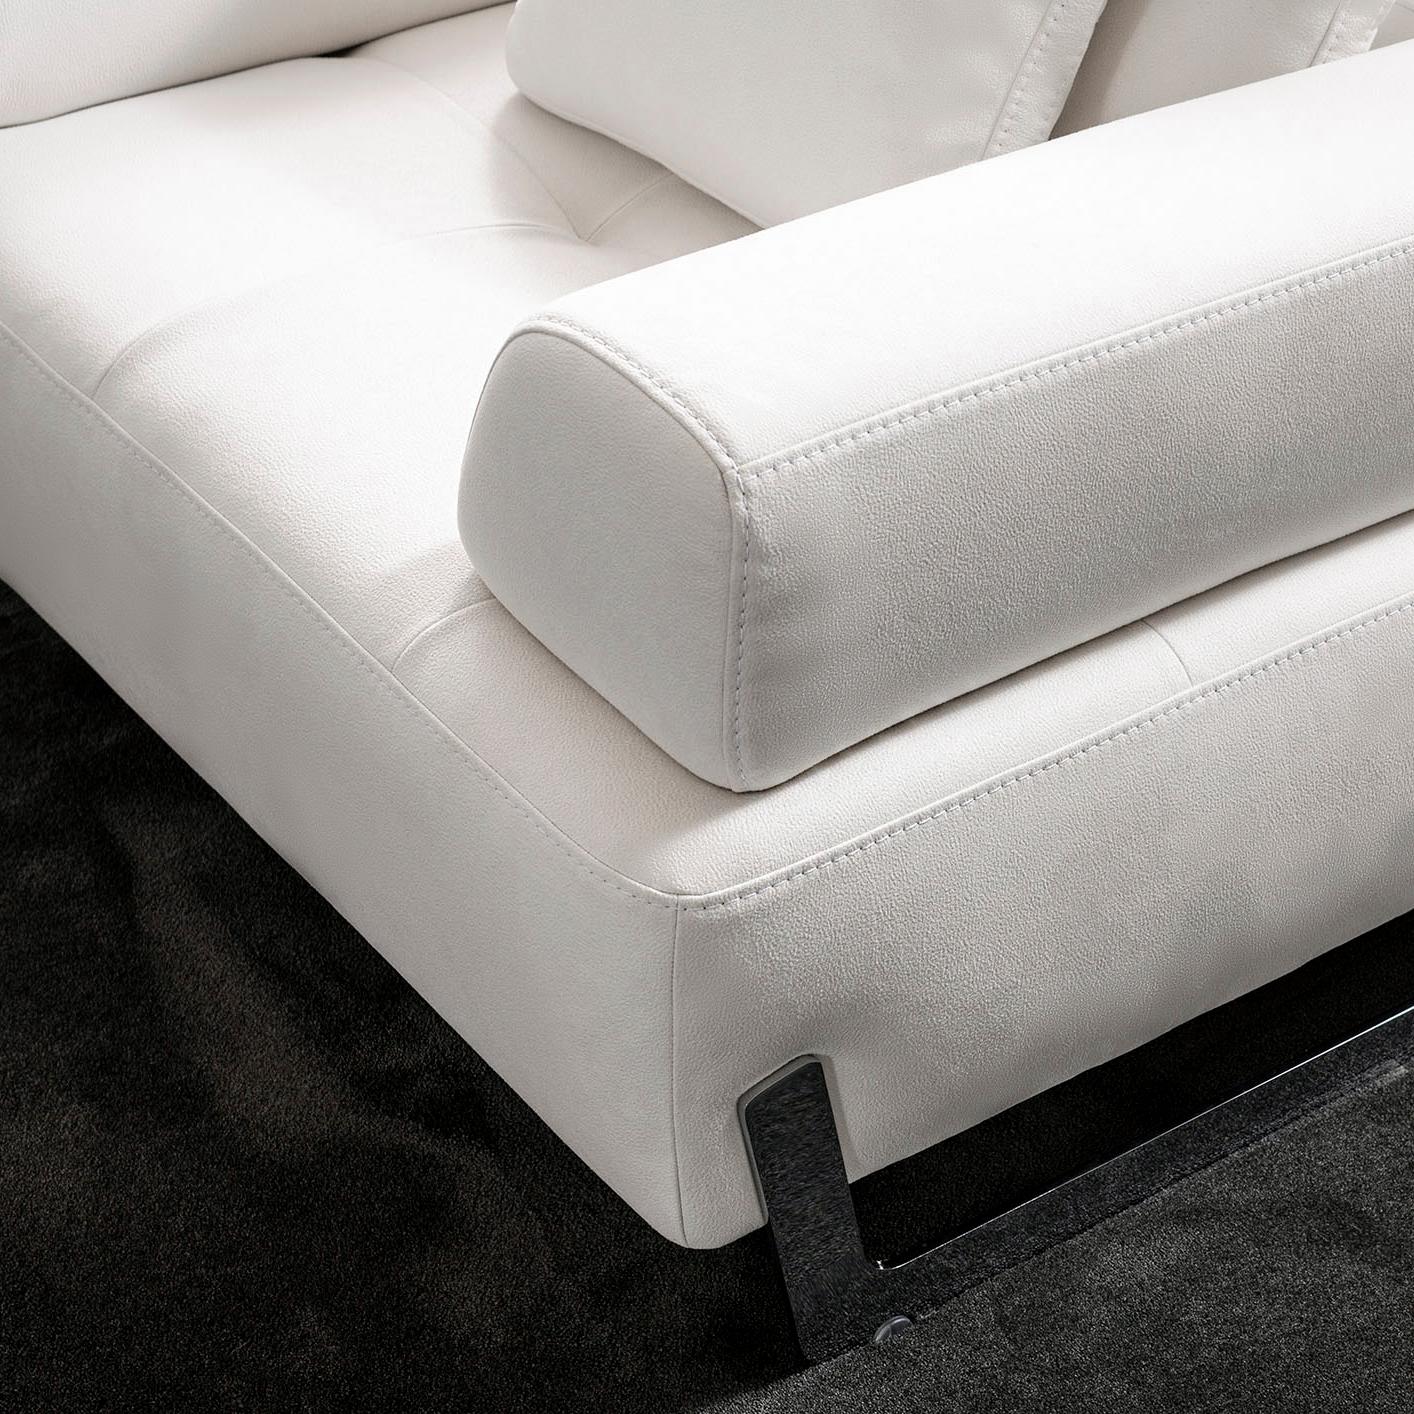 Introducing the alluring Ravenna sofa. This modern sofa is the epitome of luxury and functionality. Composed of a lavish faux suede fabric sitting atop chrome legs this sofa features a sliding backrest as well as a sliding armrest taking this